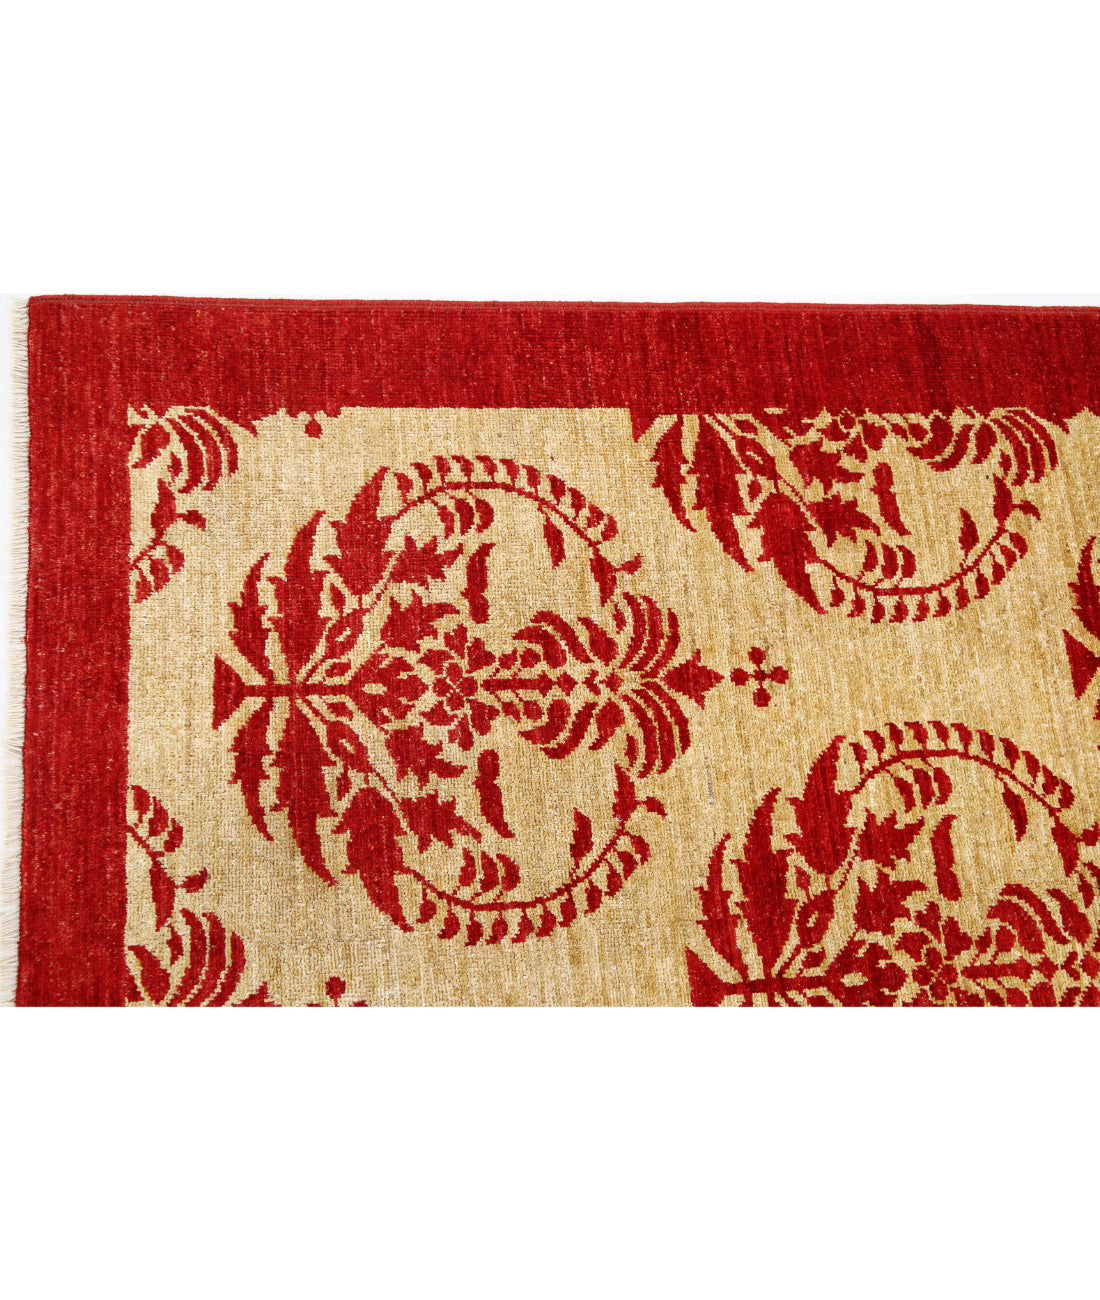 Hand Knotted Modcar Wool Rug - 8'4'' x 11'5'' 8'4'' x 11'5'' (250 X 343) / Beige / Red